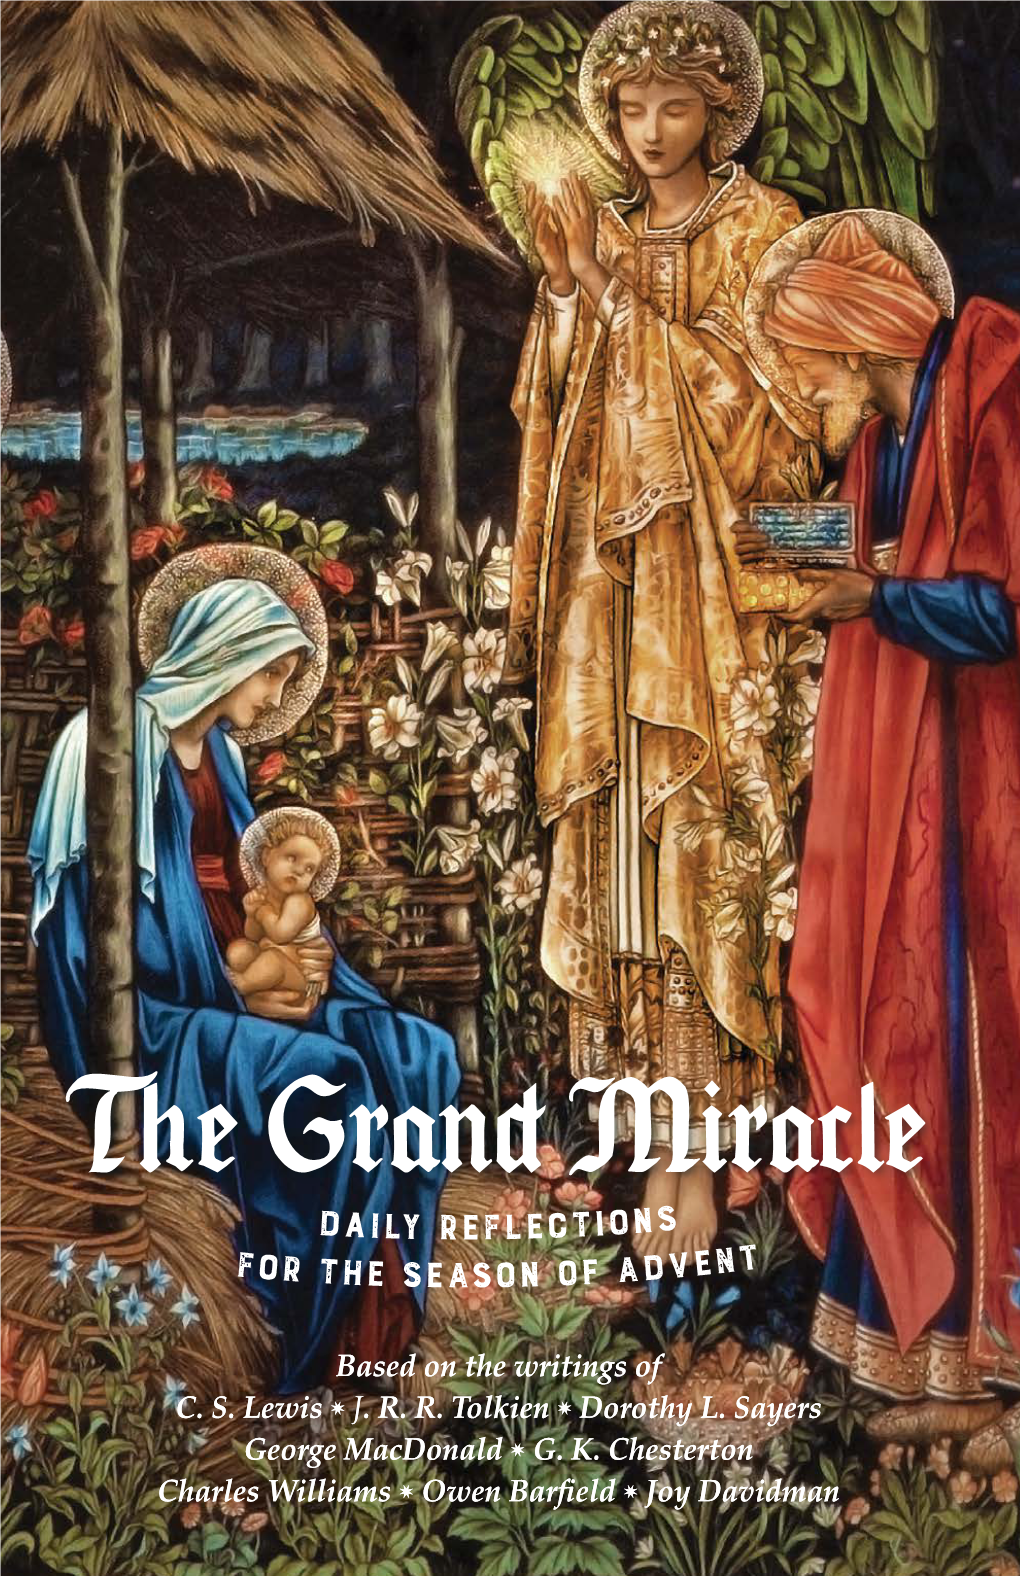 The Grand Miracle Daily Reflections for the Season of Advent